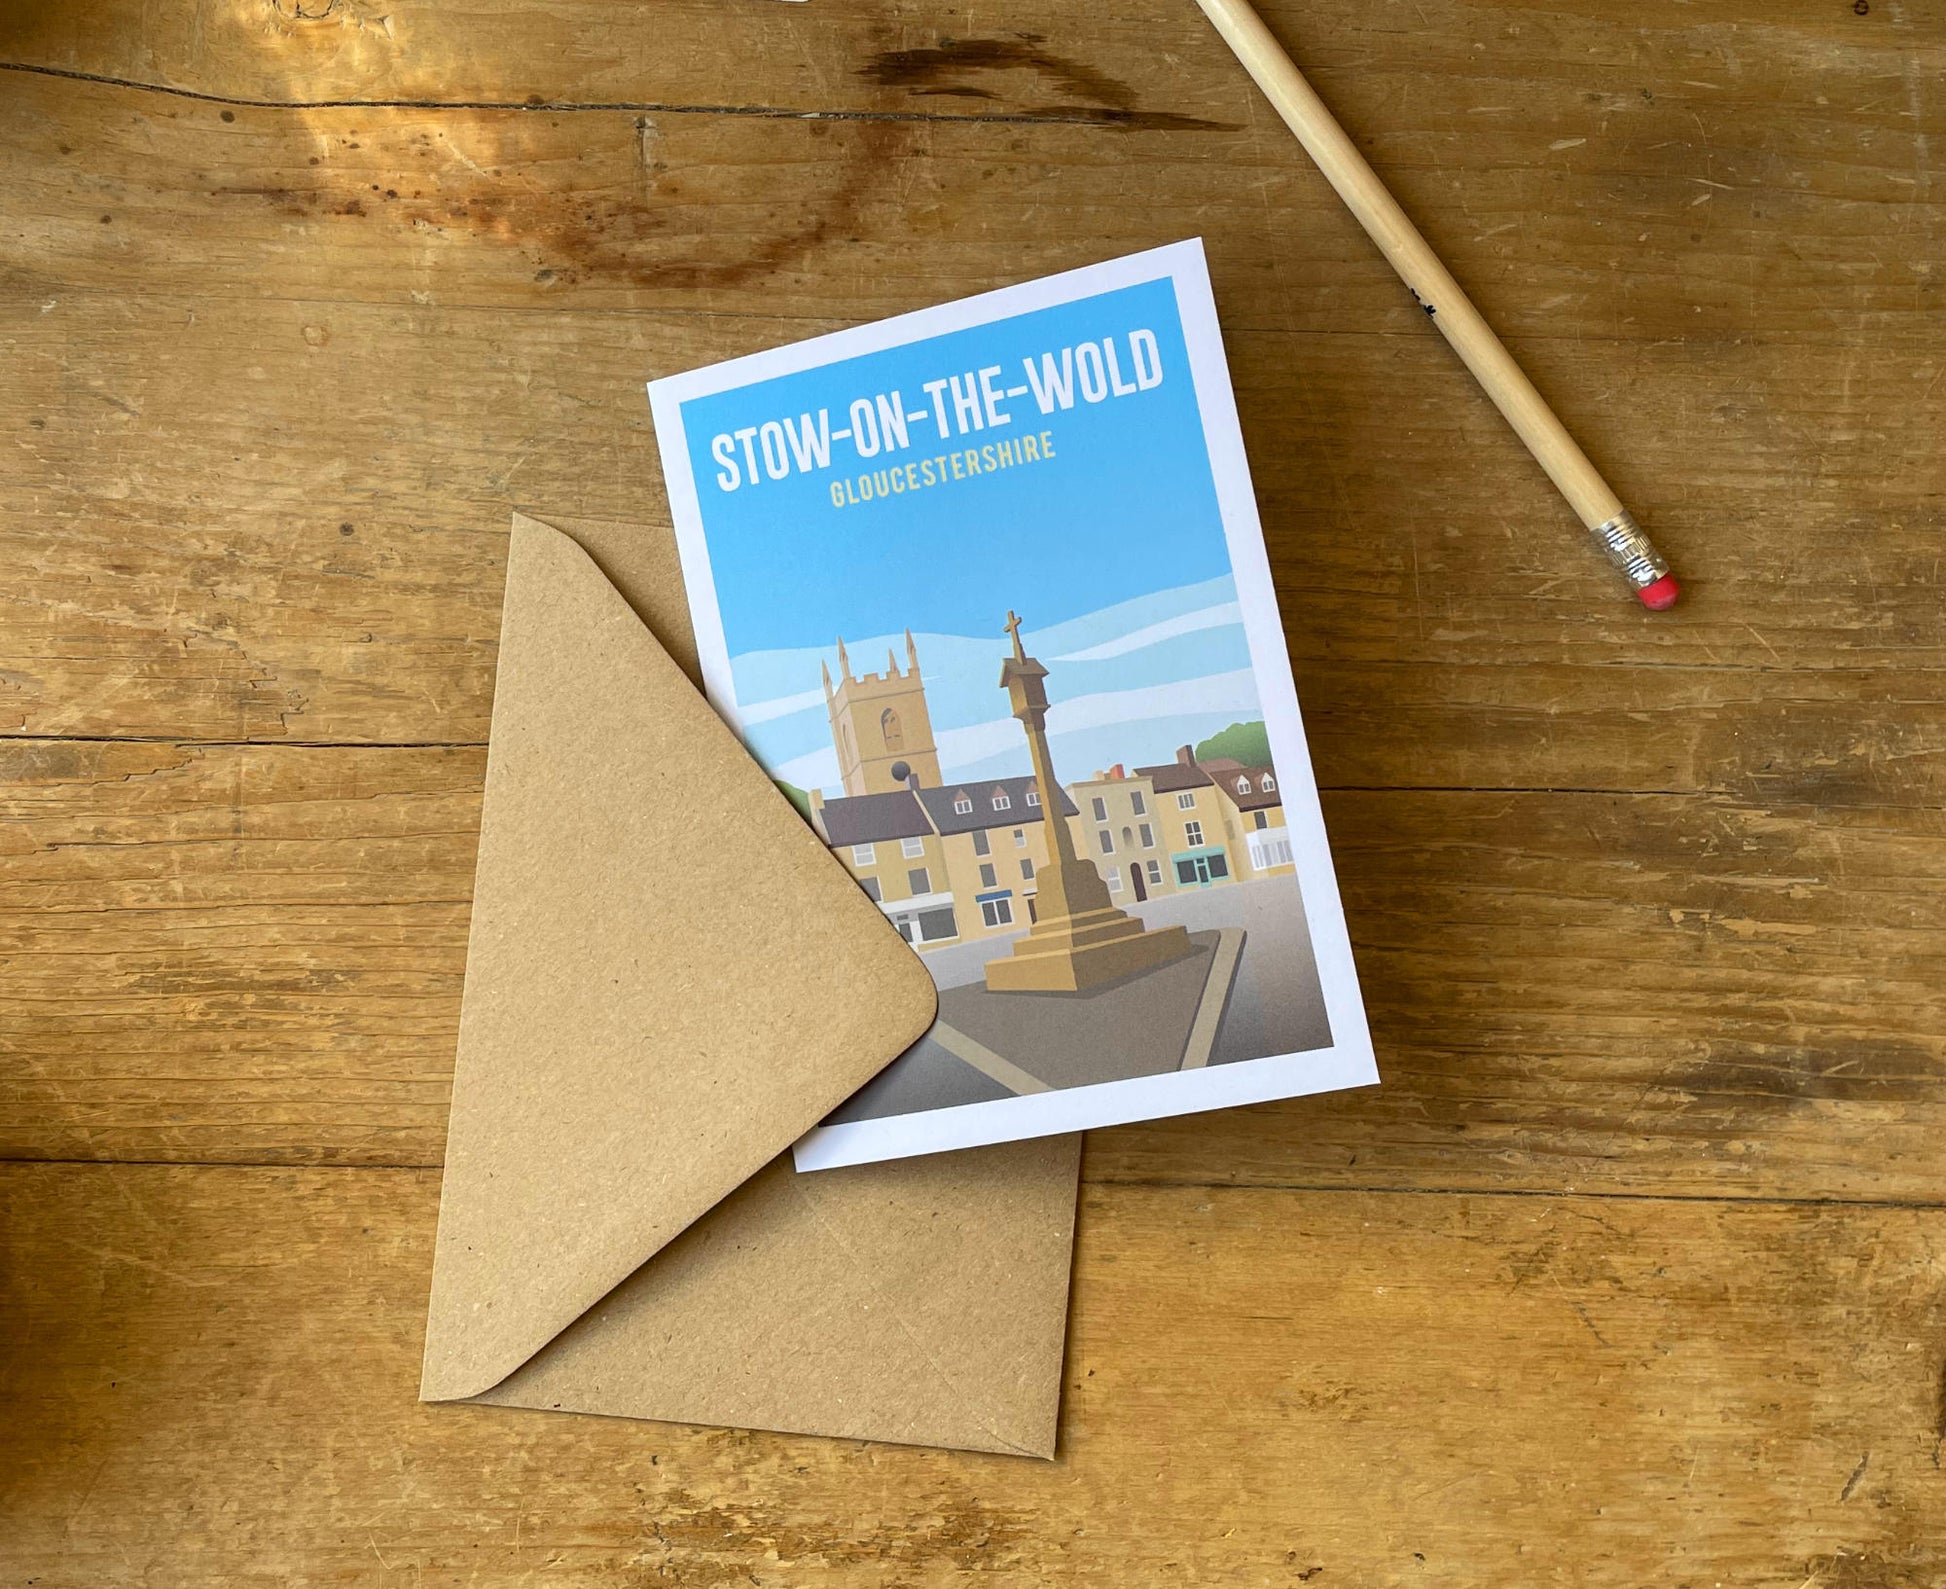 Stow-on-the-Wold Greeting Card on desk